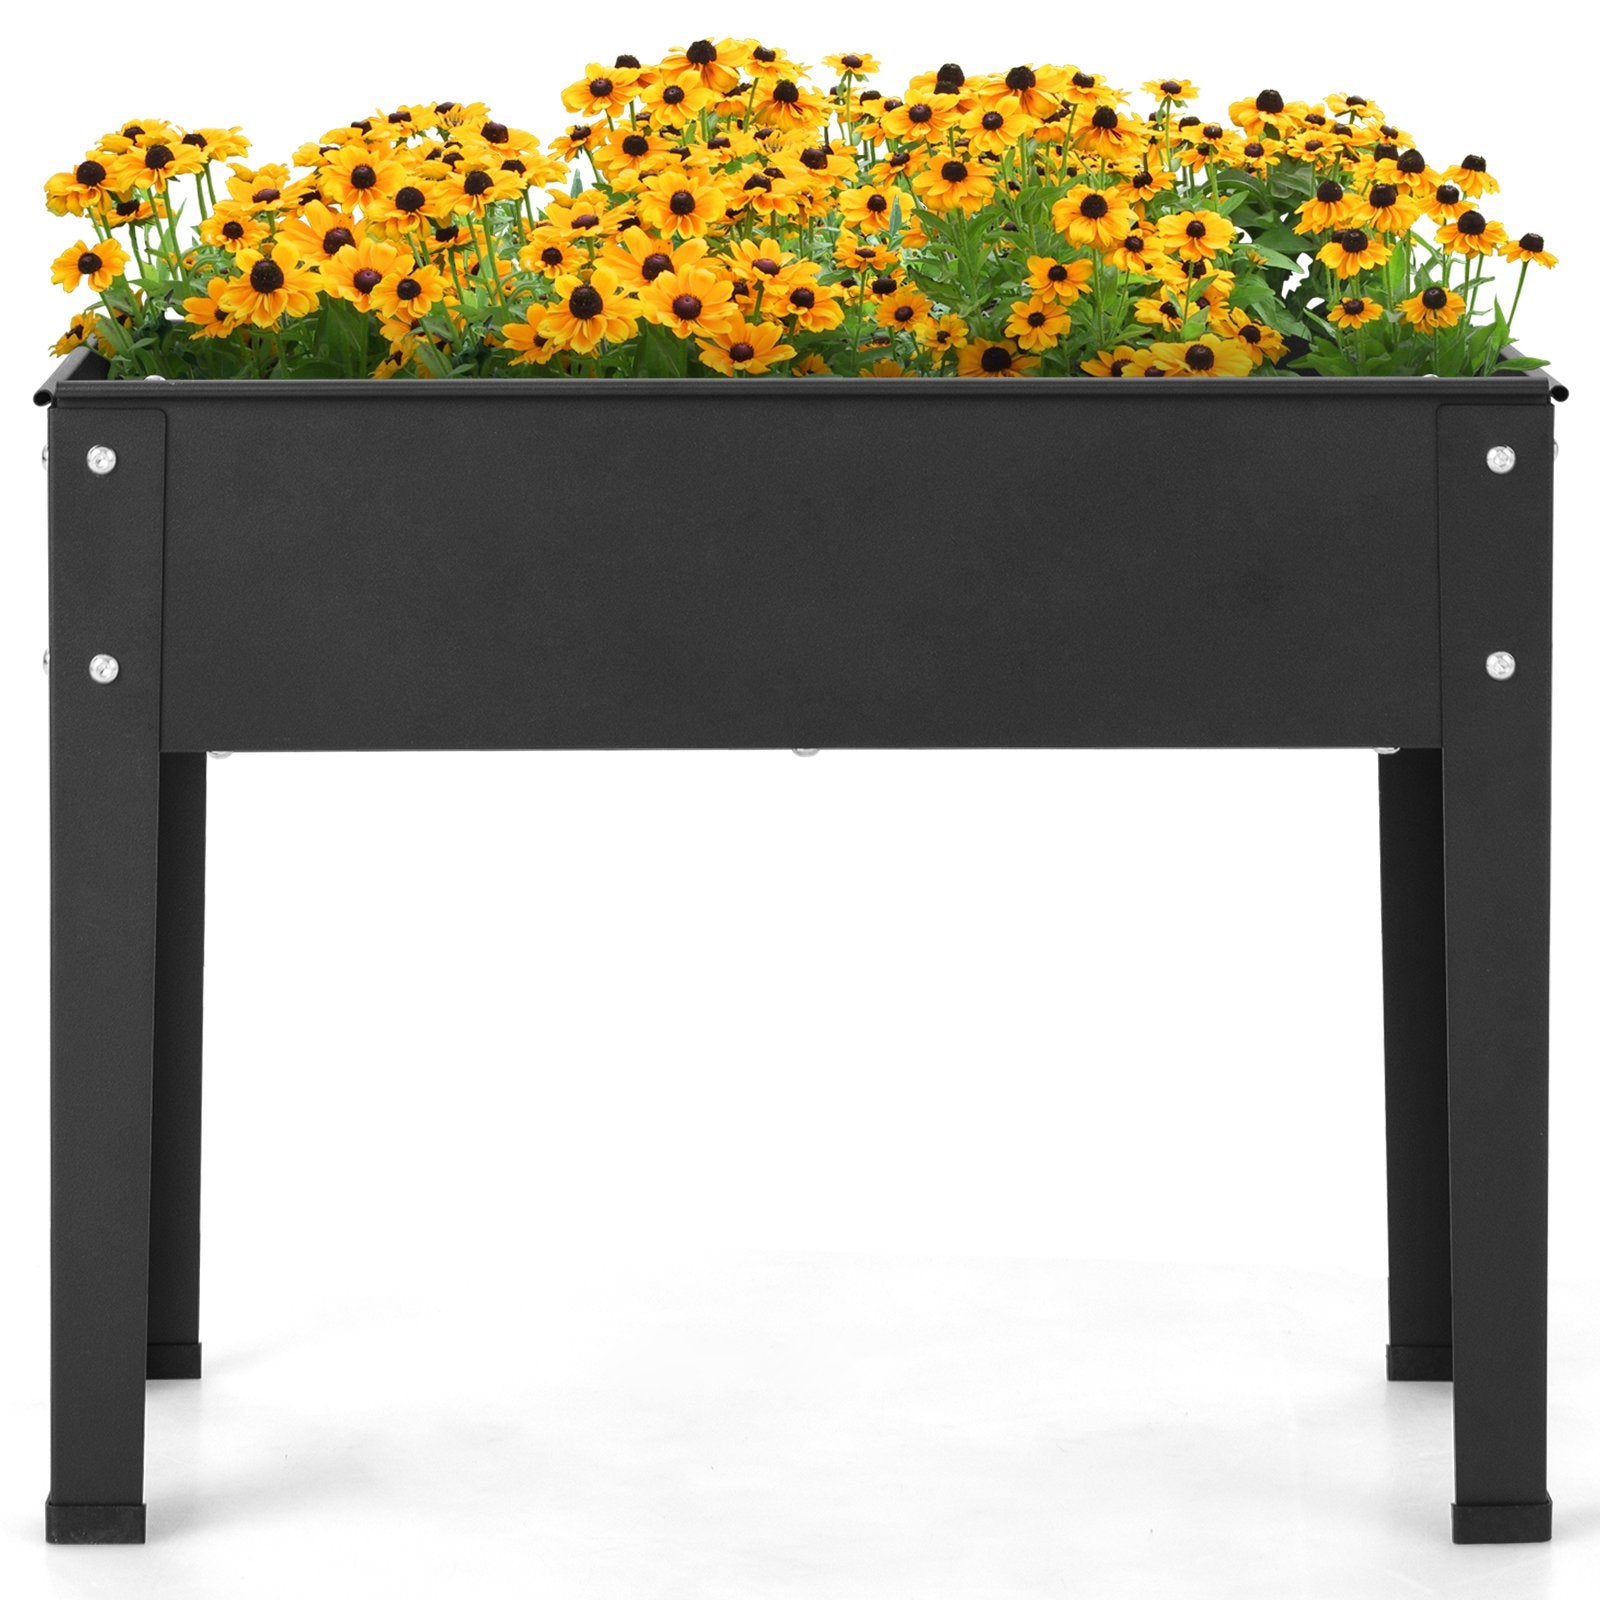 Metal Raised Garden Bed with Legs and Drainage Hole for Vegetable Flower-24 x 11 x 18 inches, Black - Gallery Canada